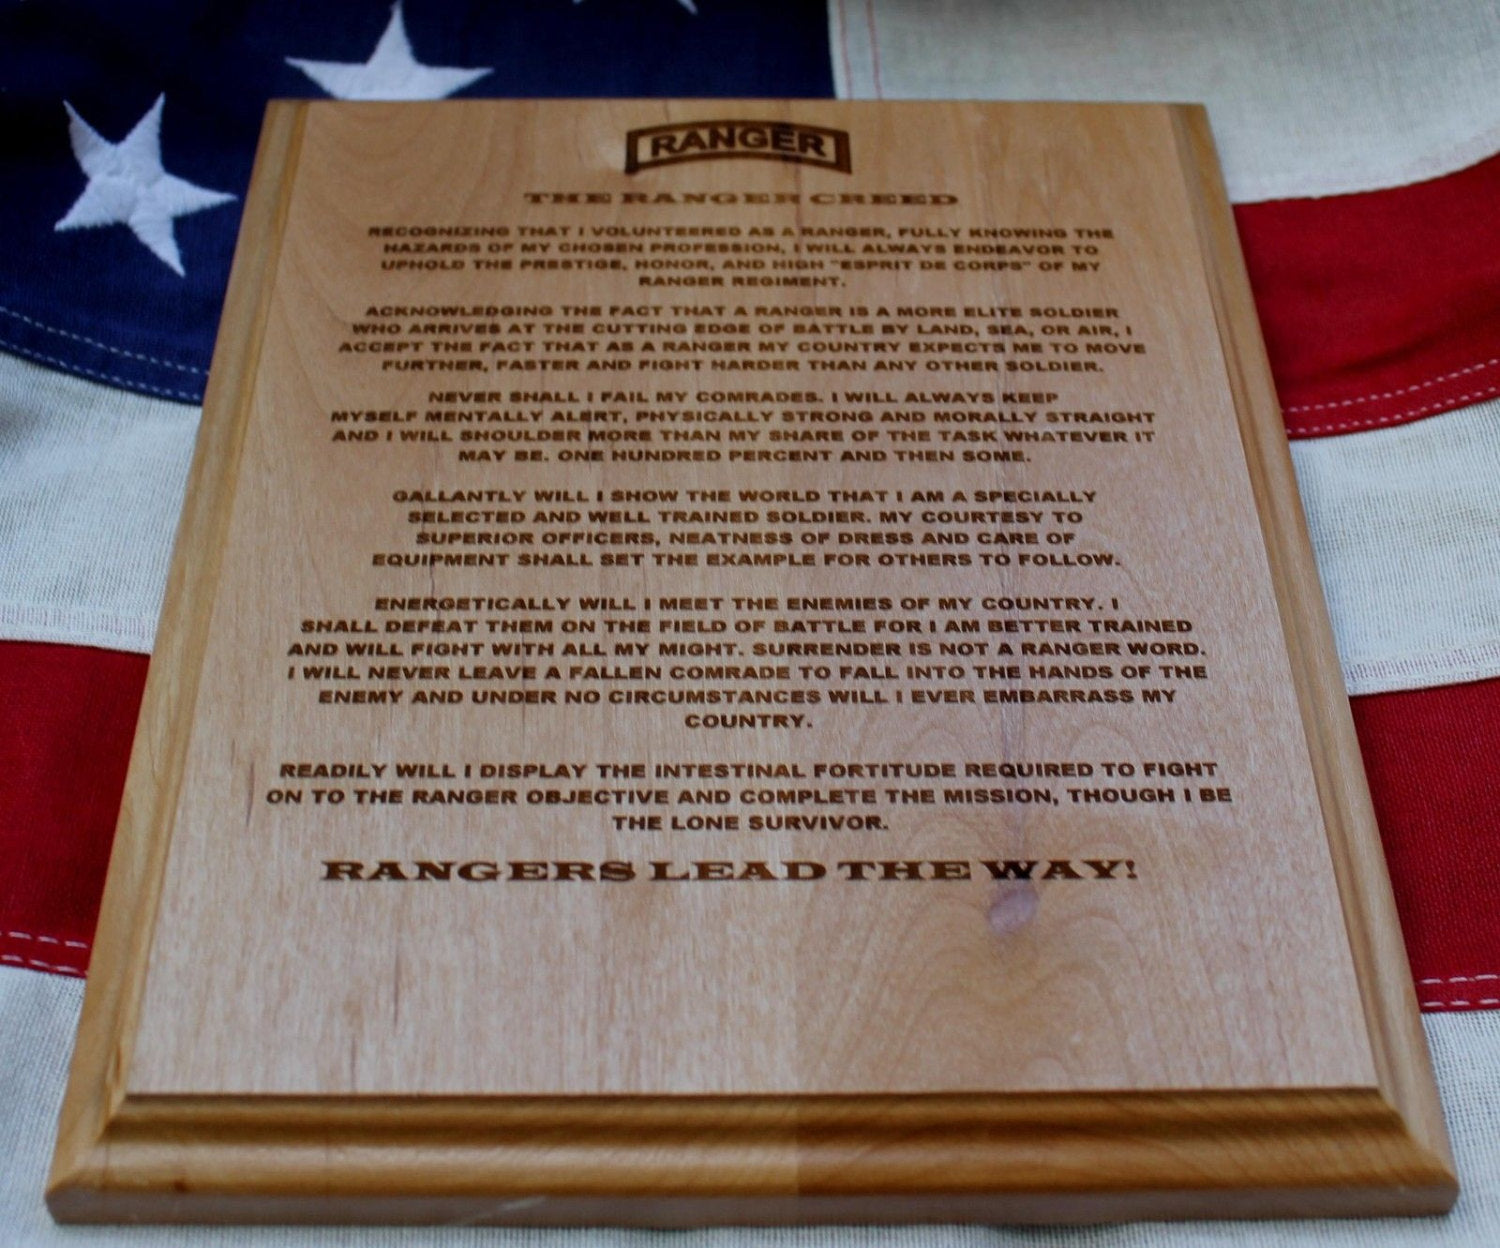 US Army Ranger Creed Plaque